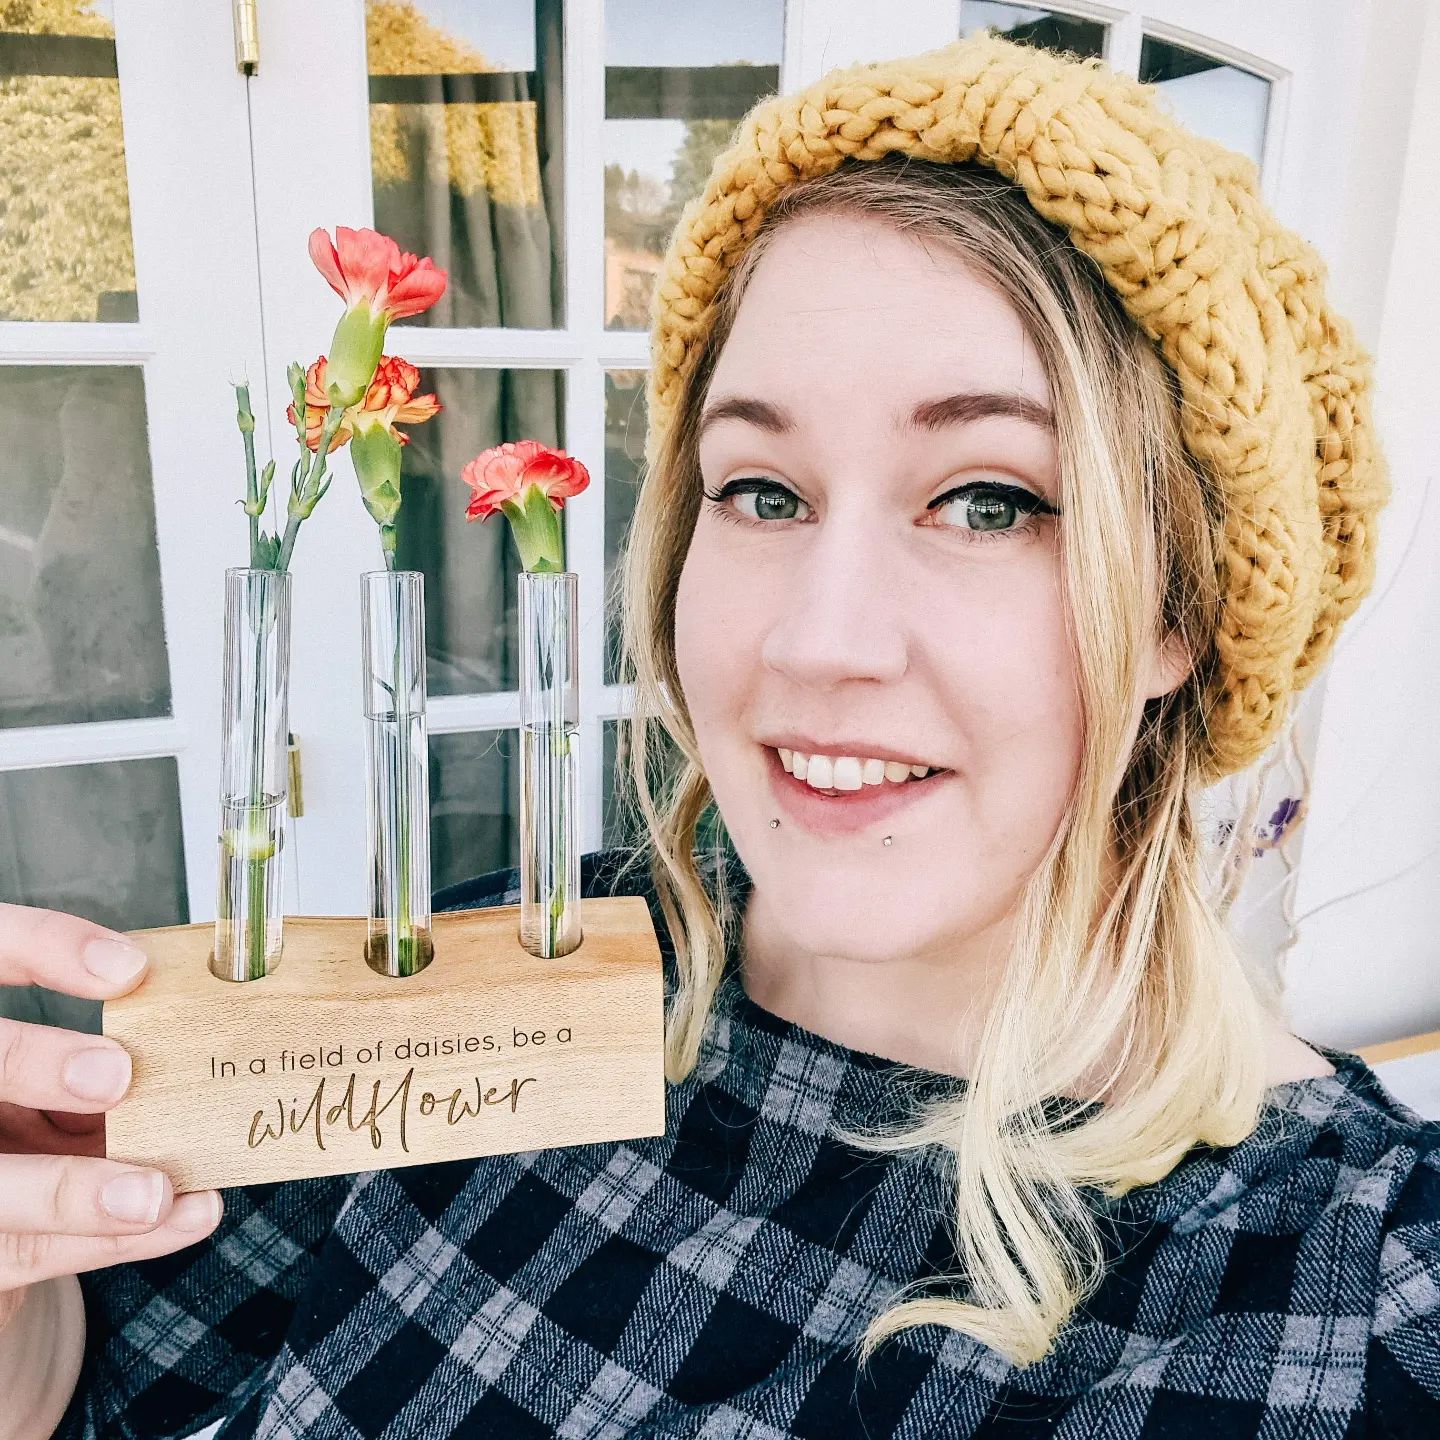 Lauren from Ingrained Inc holding a wildflower test tube vase that says in a field of daisies be a wildflower